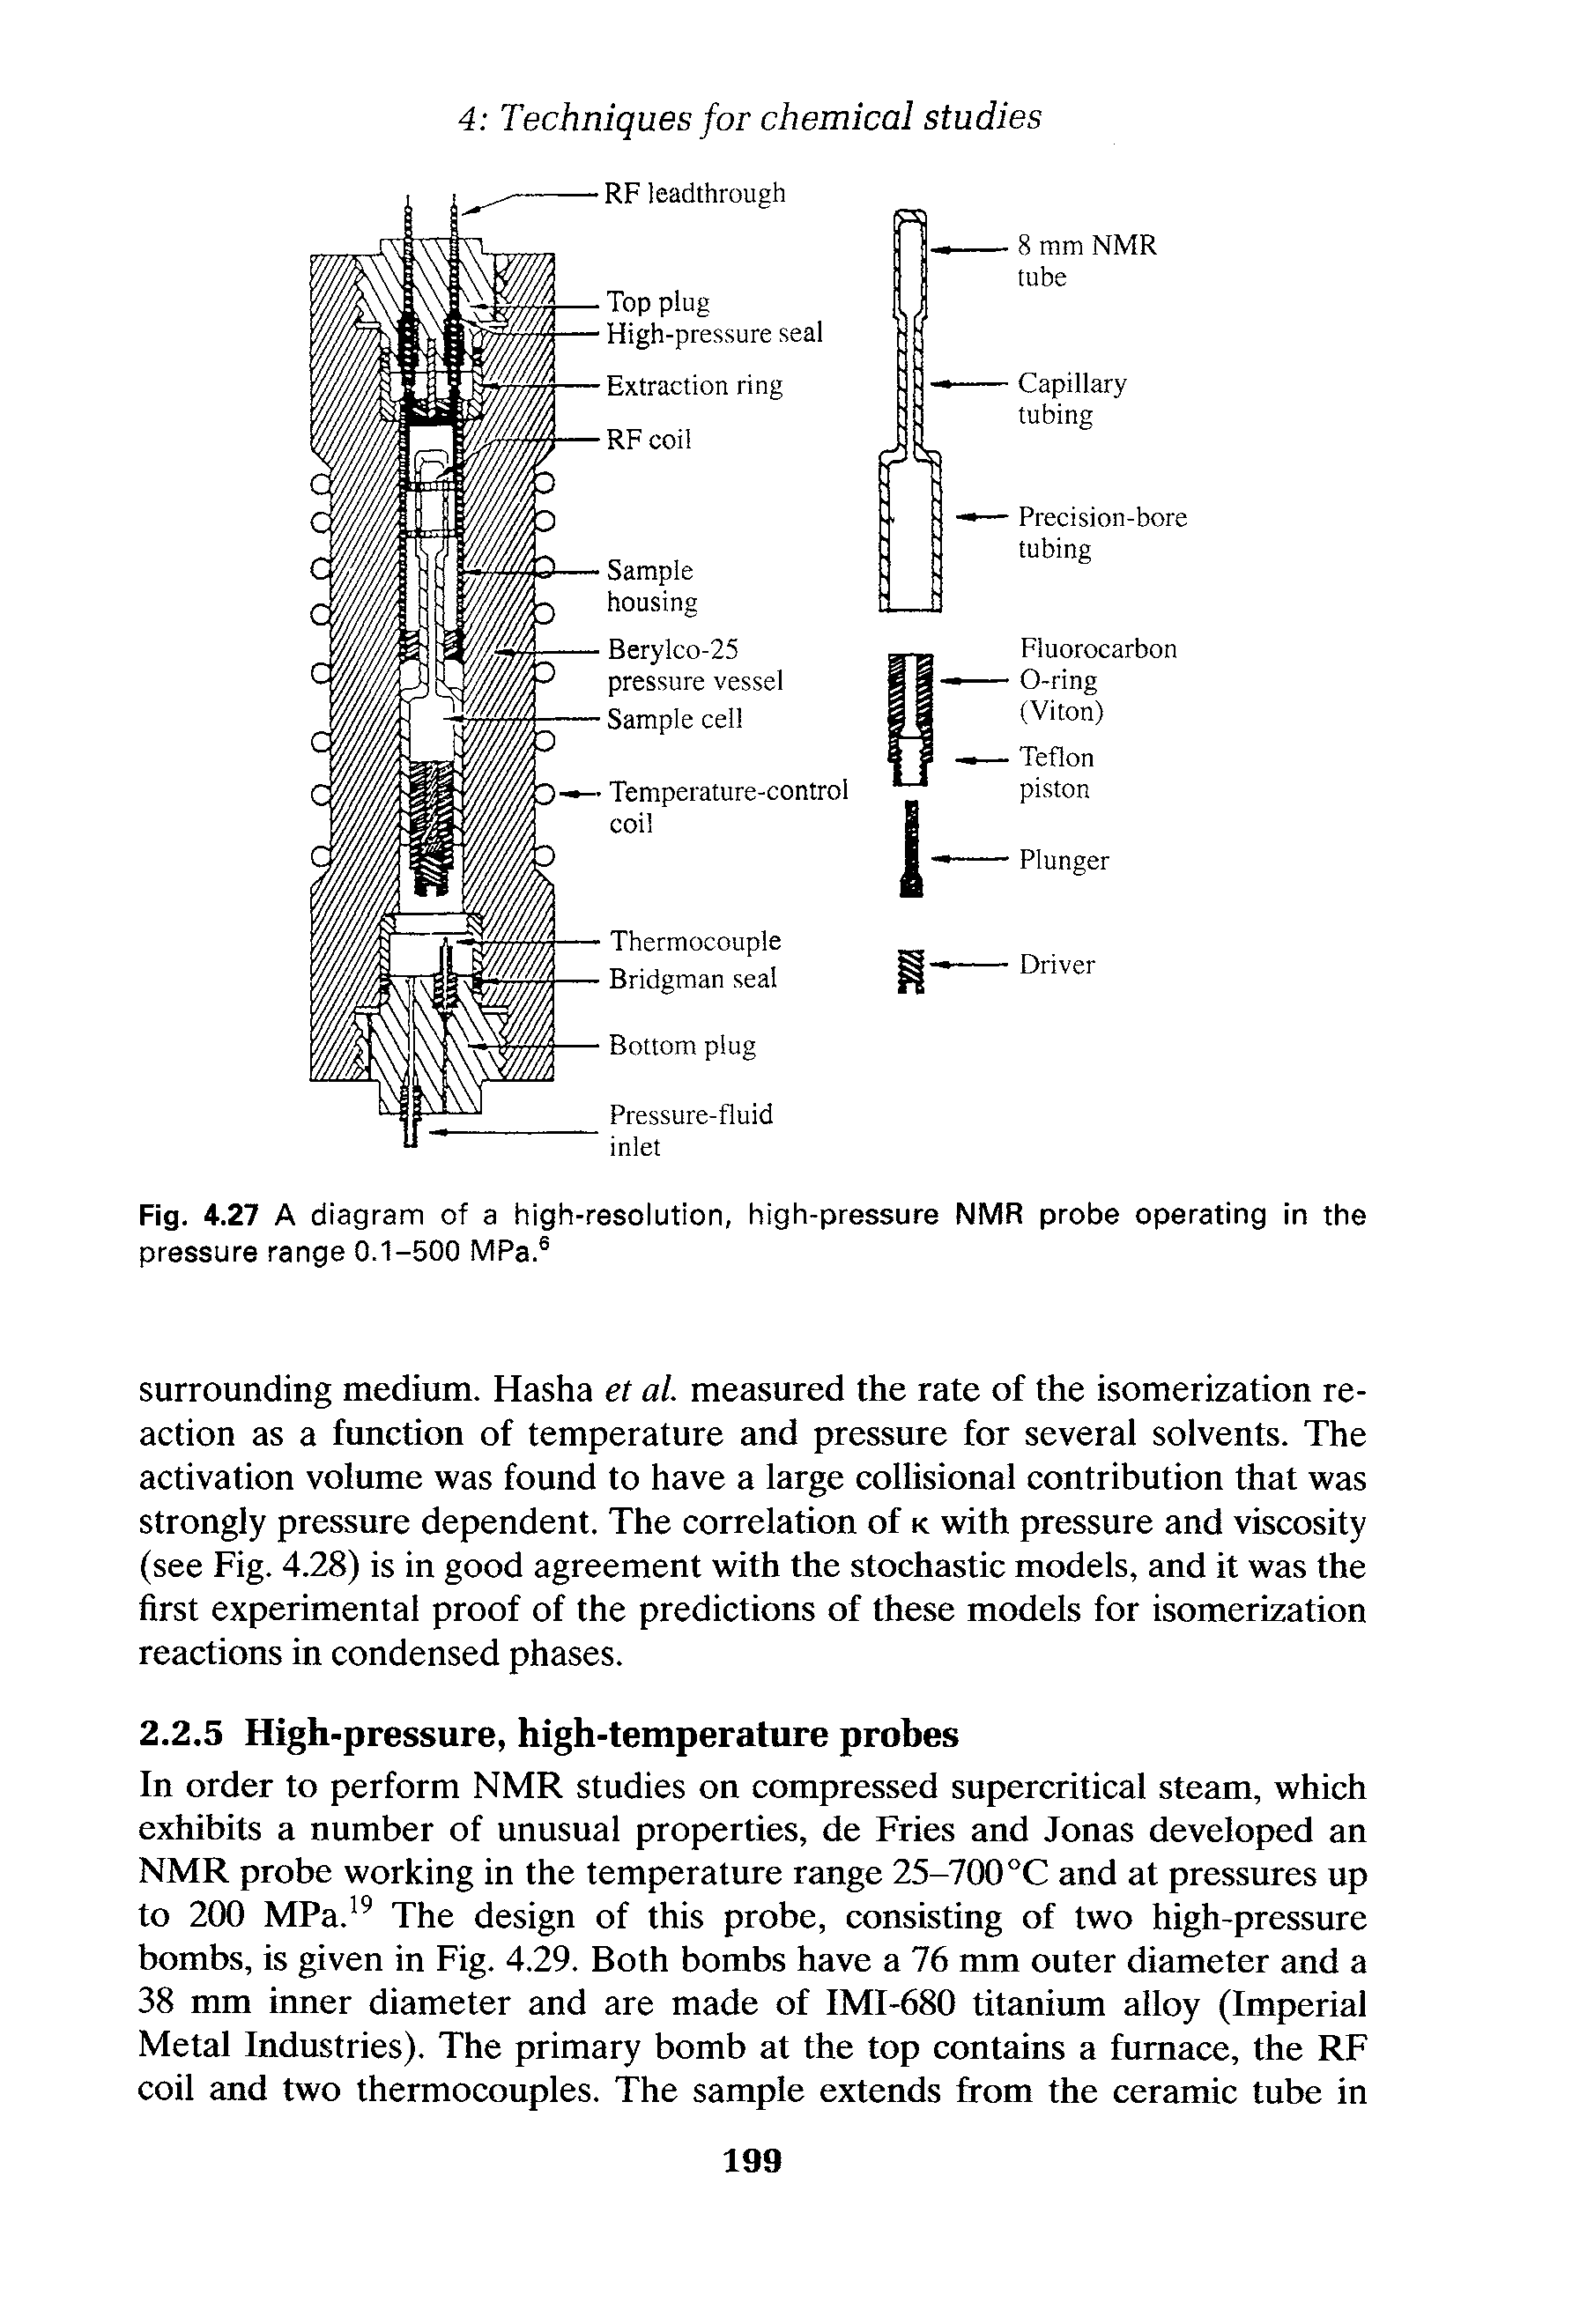 Fig. 4.27 A diagram of a high-resolution, high-pressure NMR probe operating in the pressure range 0.1-500 MPa. ...